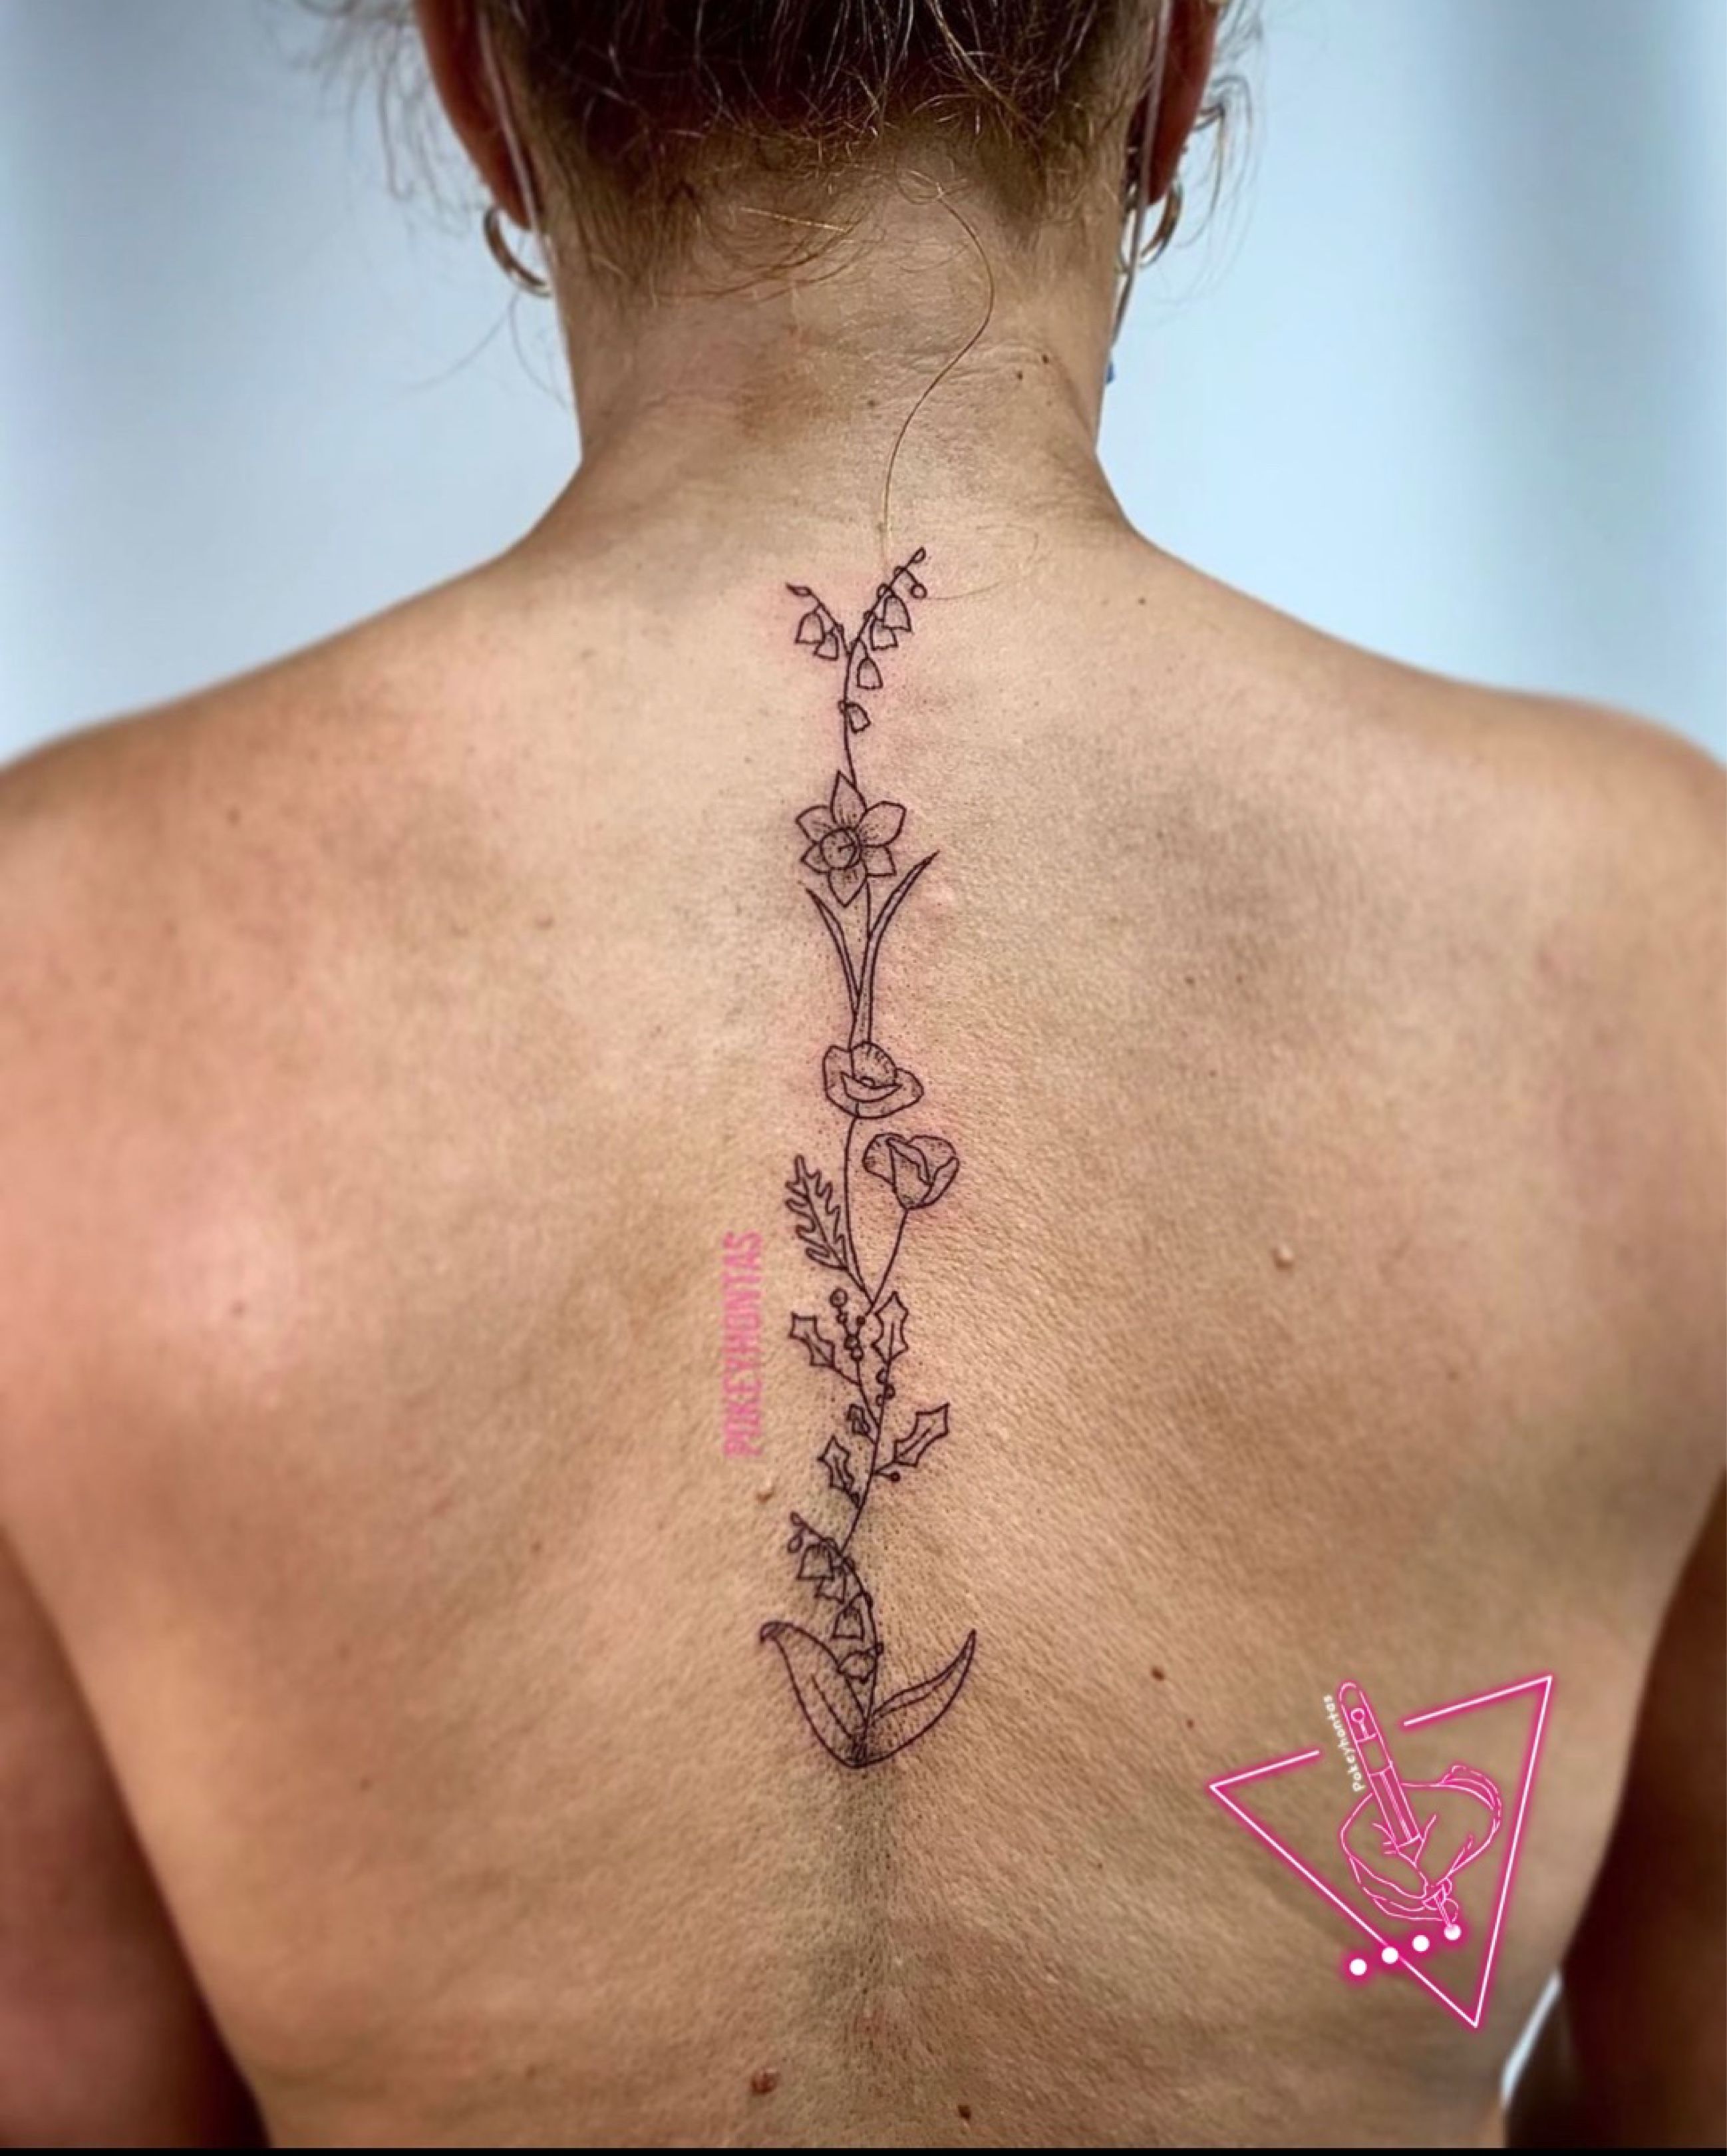 Tattoo uploaded by Joy Neuman  orchid on the shoulder  Tattoodo